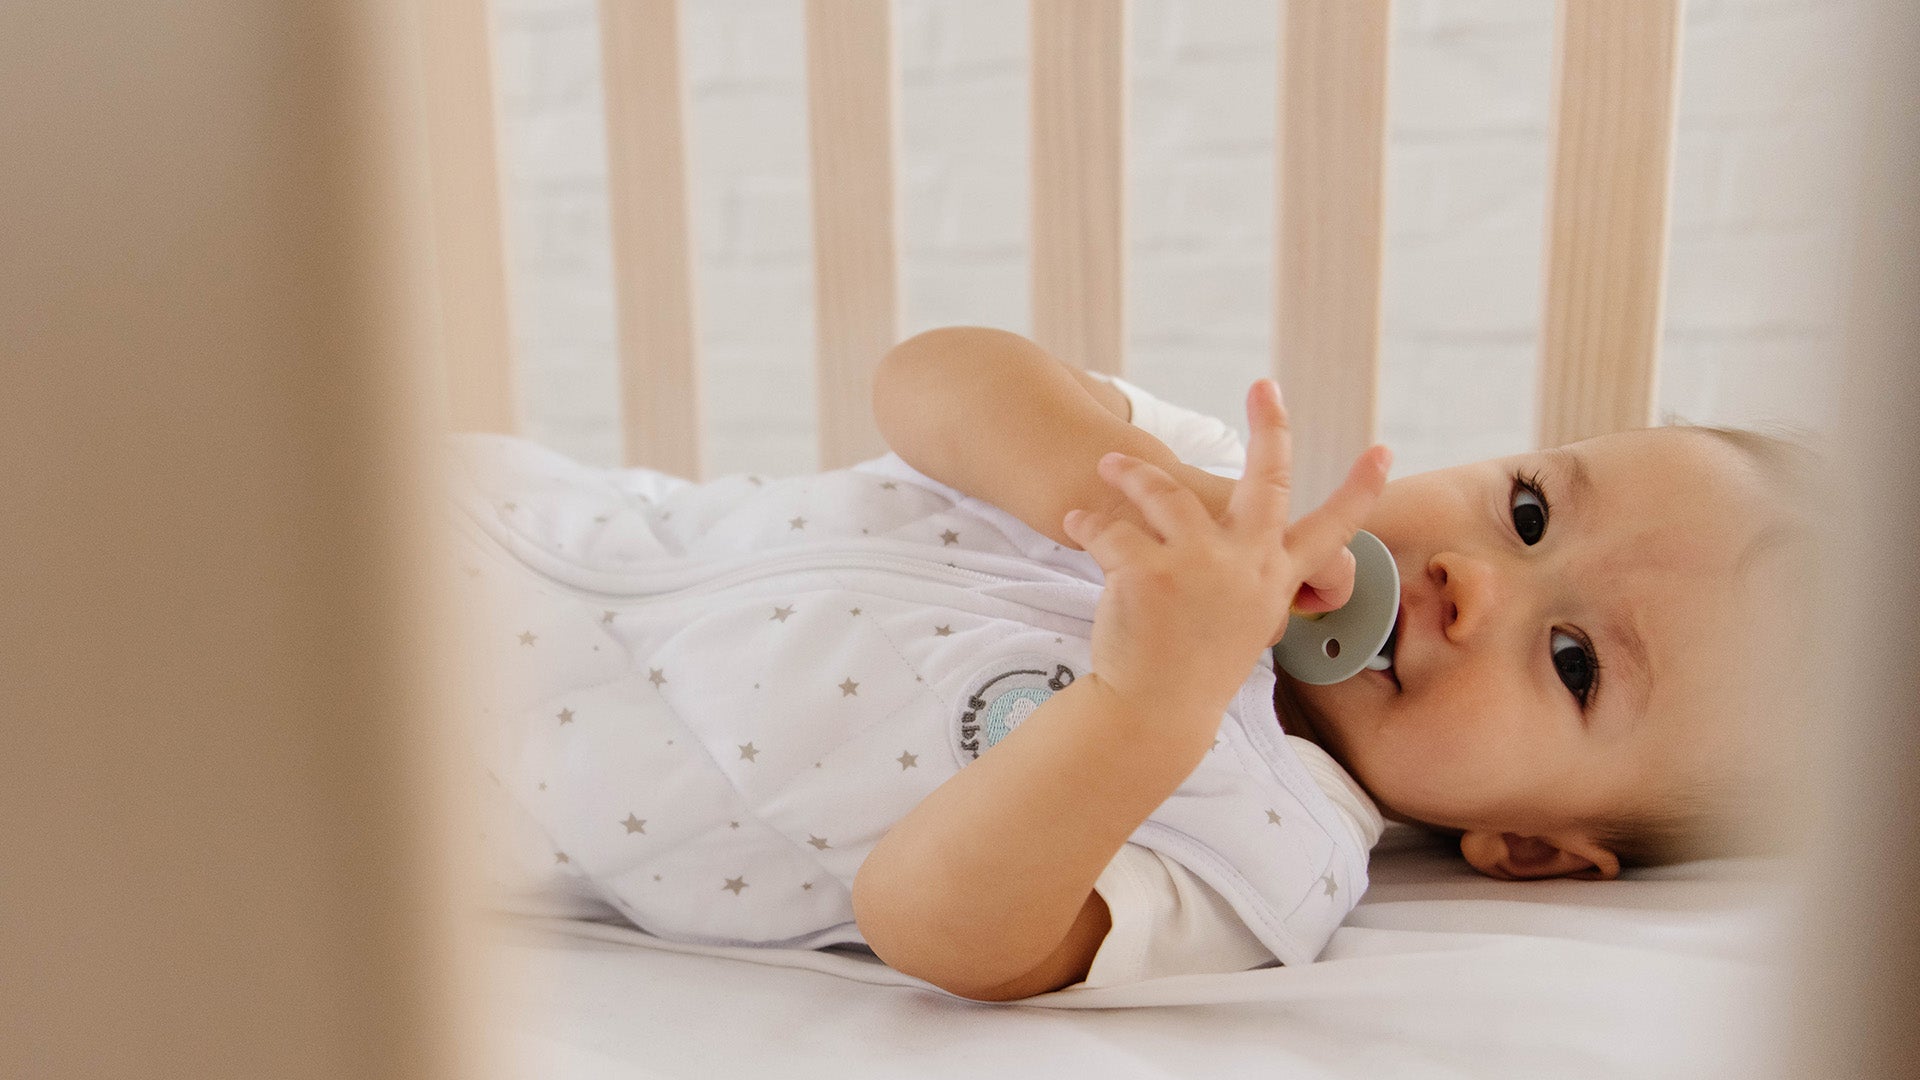 What Is The Best Noise For Baby Sleep?